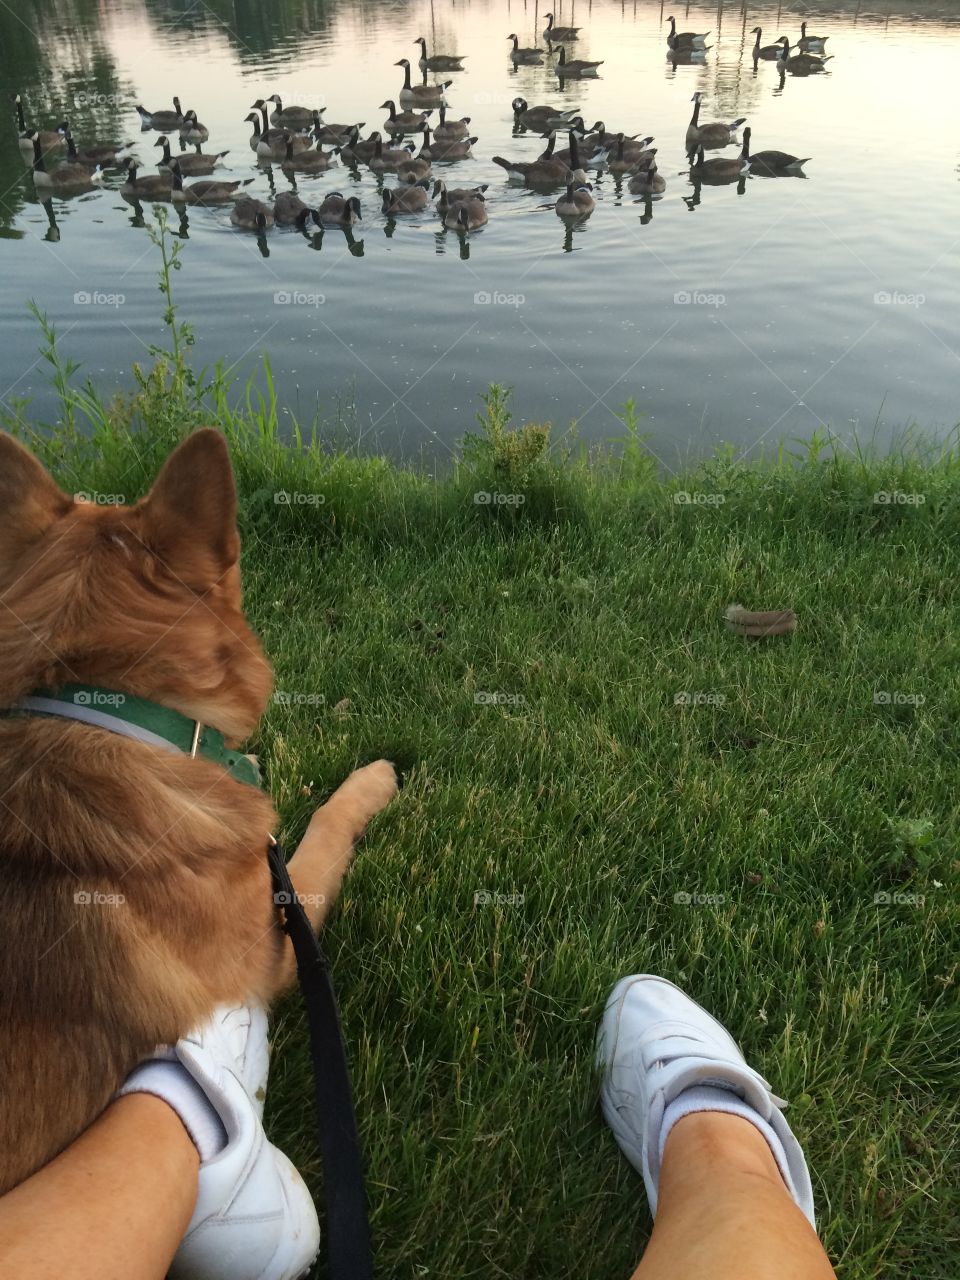 My dog restrains himself from swimming with the geese 